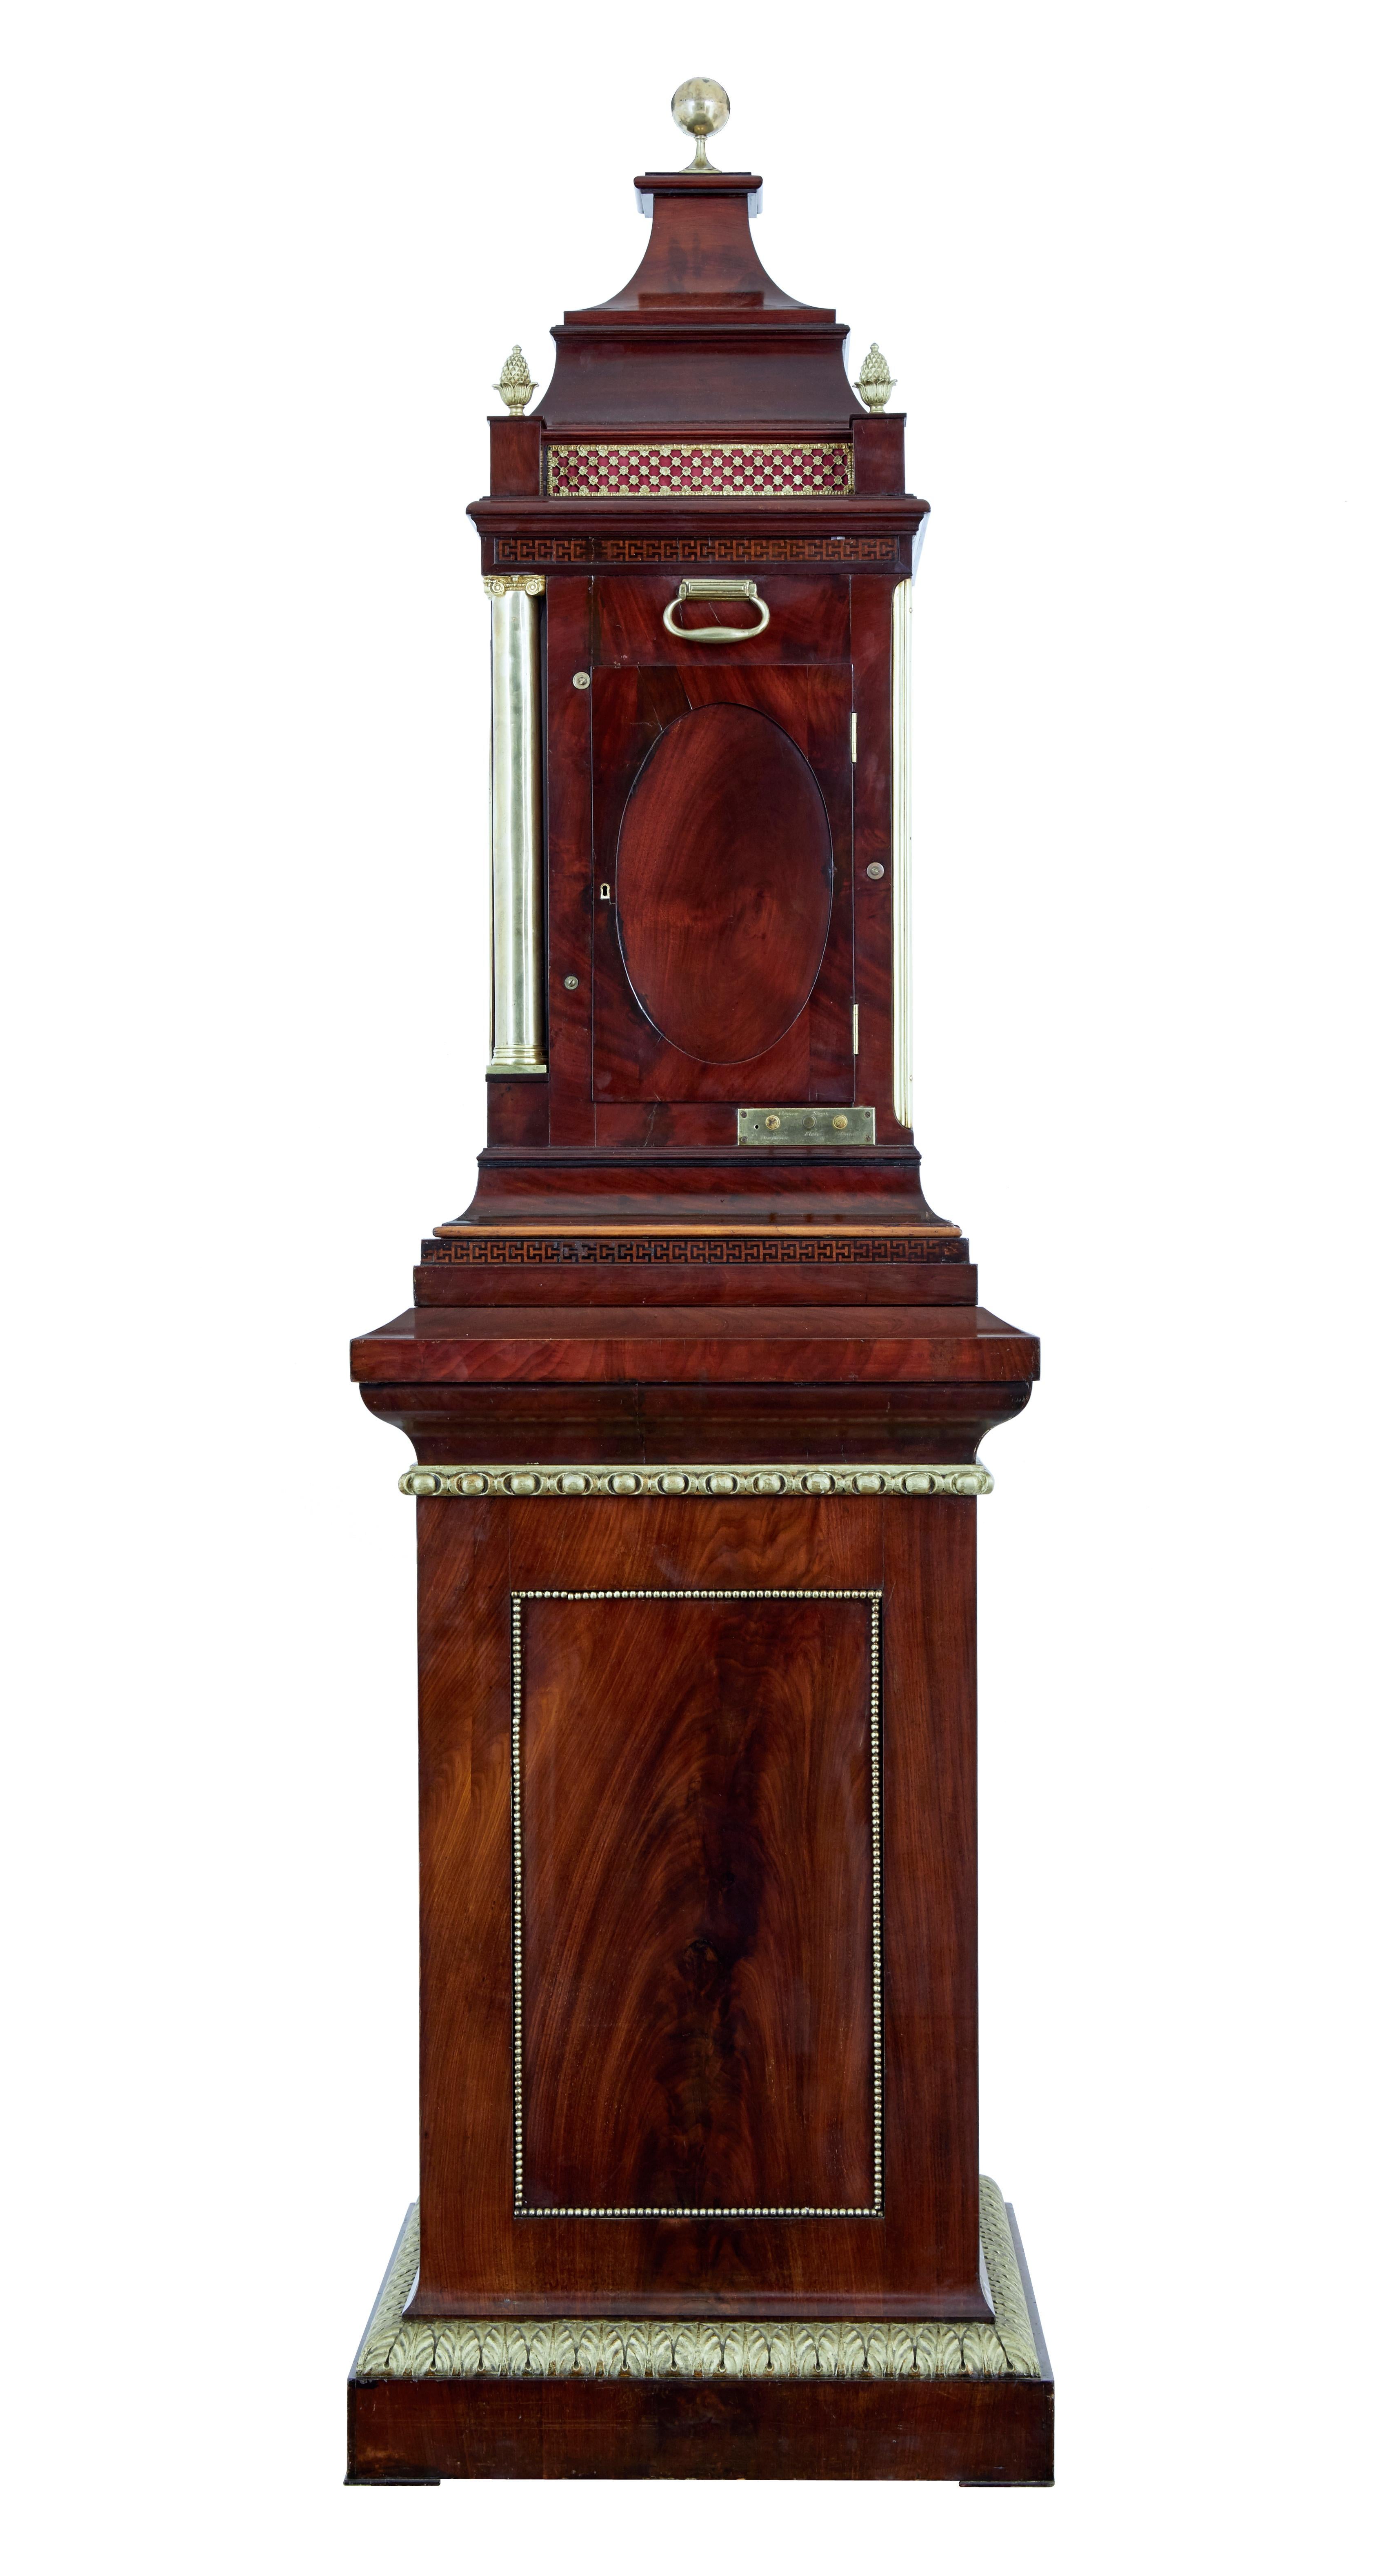 Hand-Crafted Important Regency Period Mahogany Case Musical Organ Clock